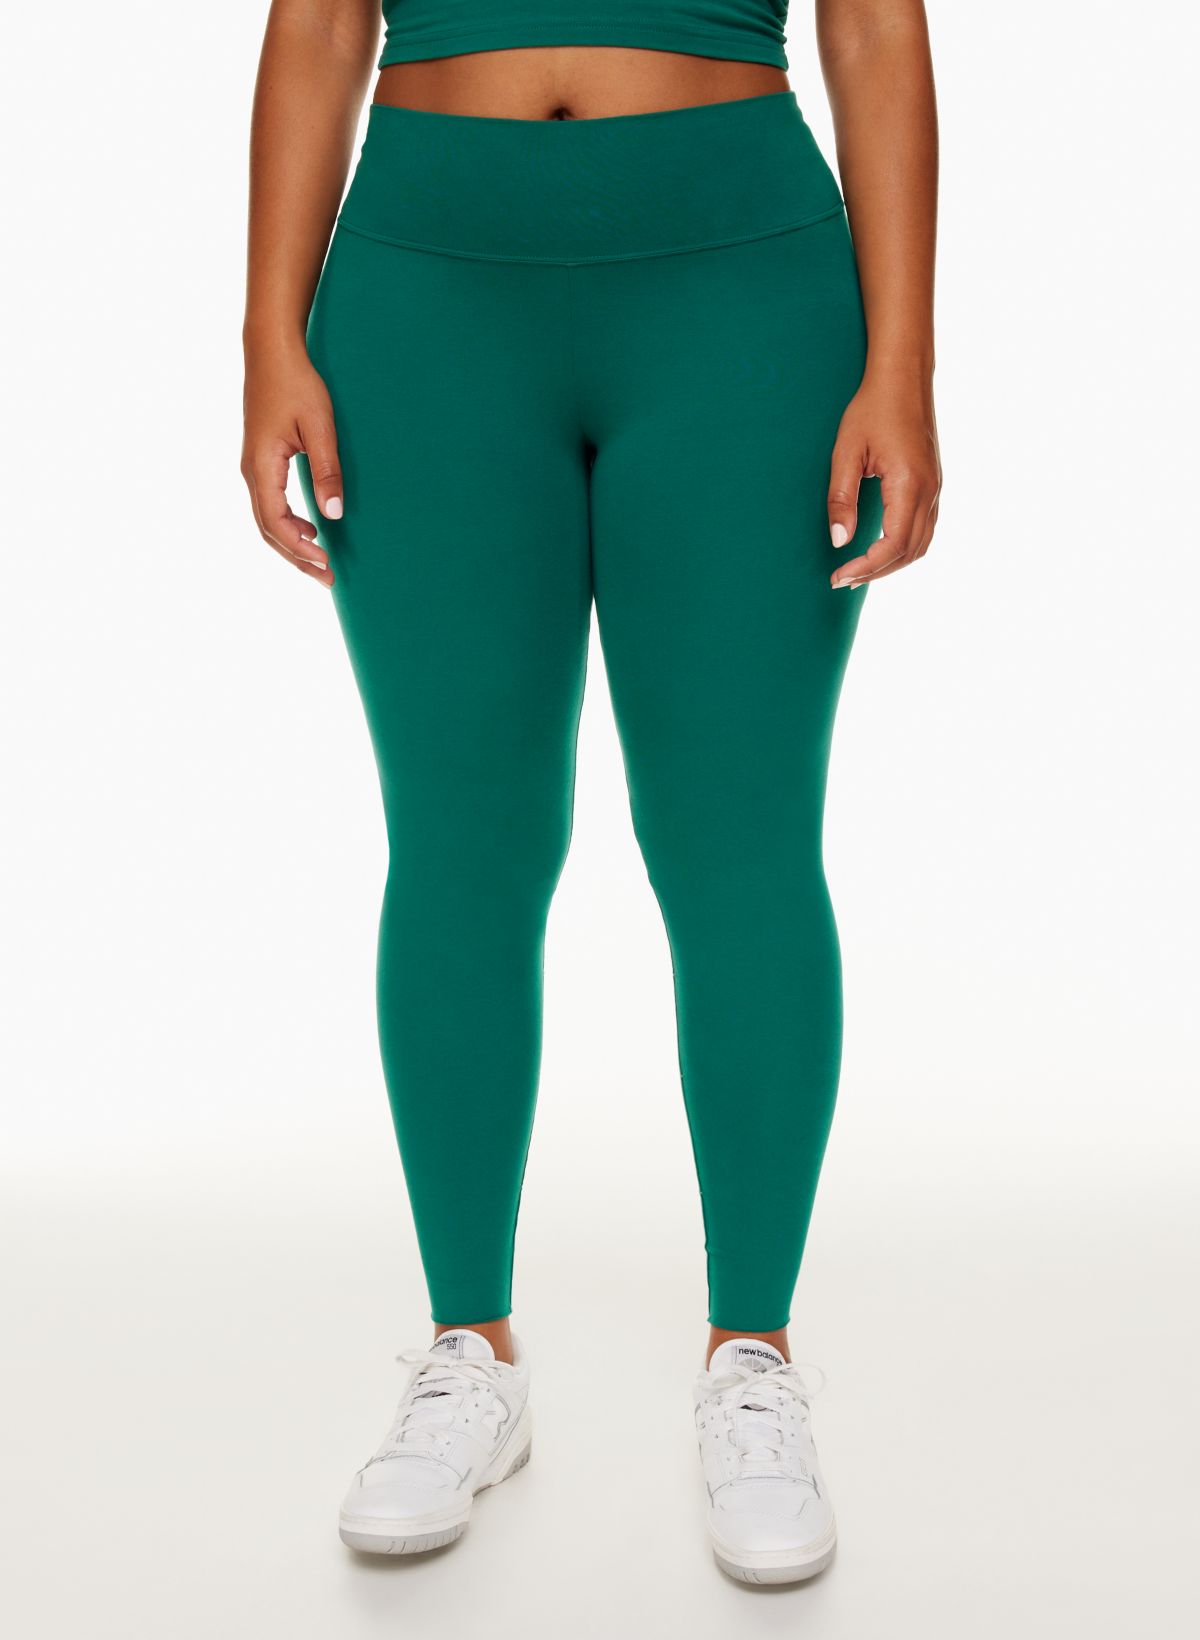 Yvette Activewear for Plus Sizes Review - Life in a Break Down